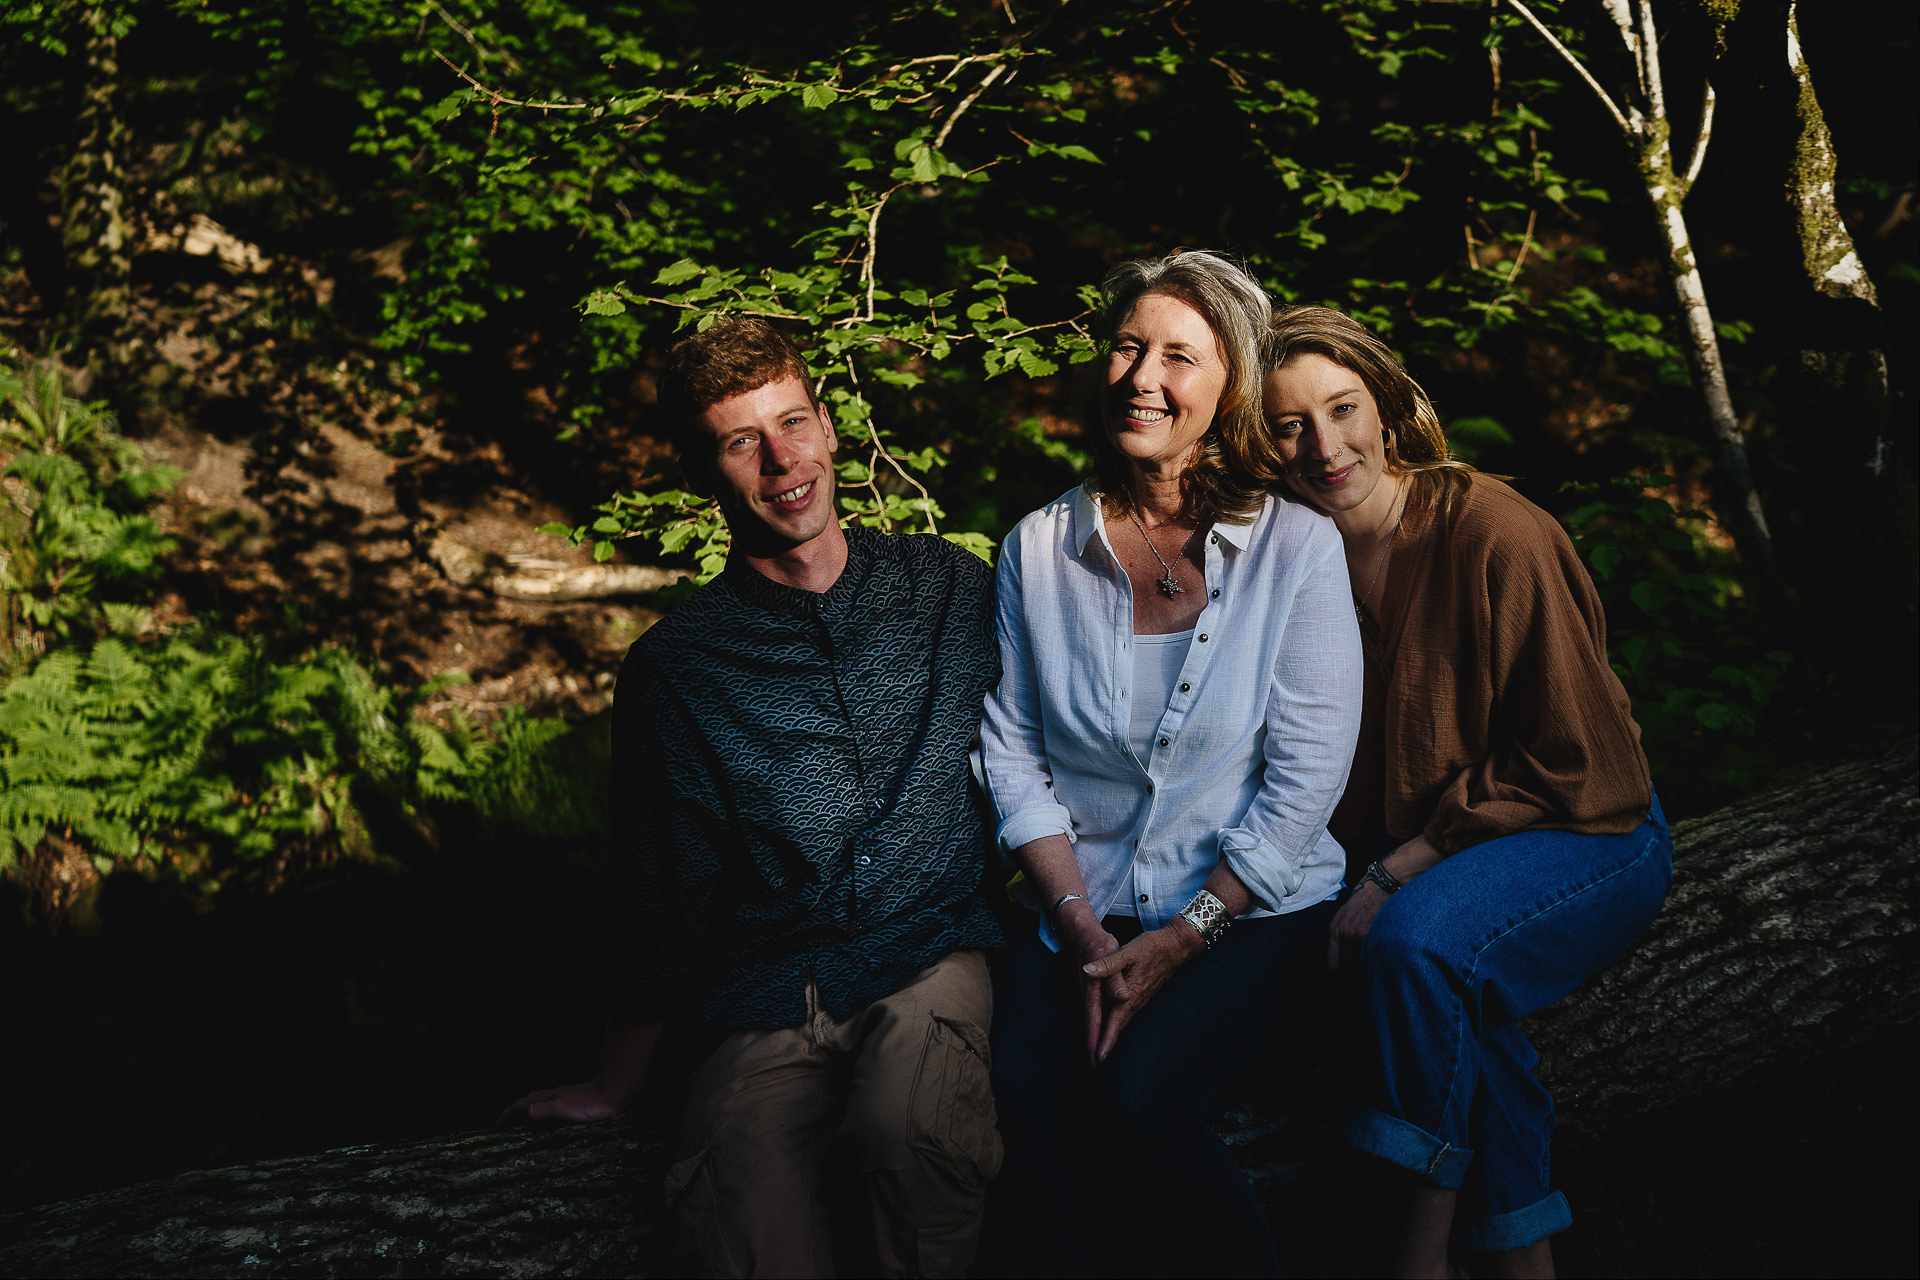 Family photography of a woman with adult children sitting on a log in woodland